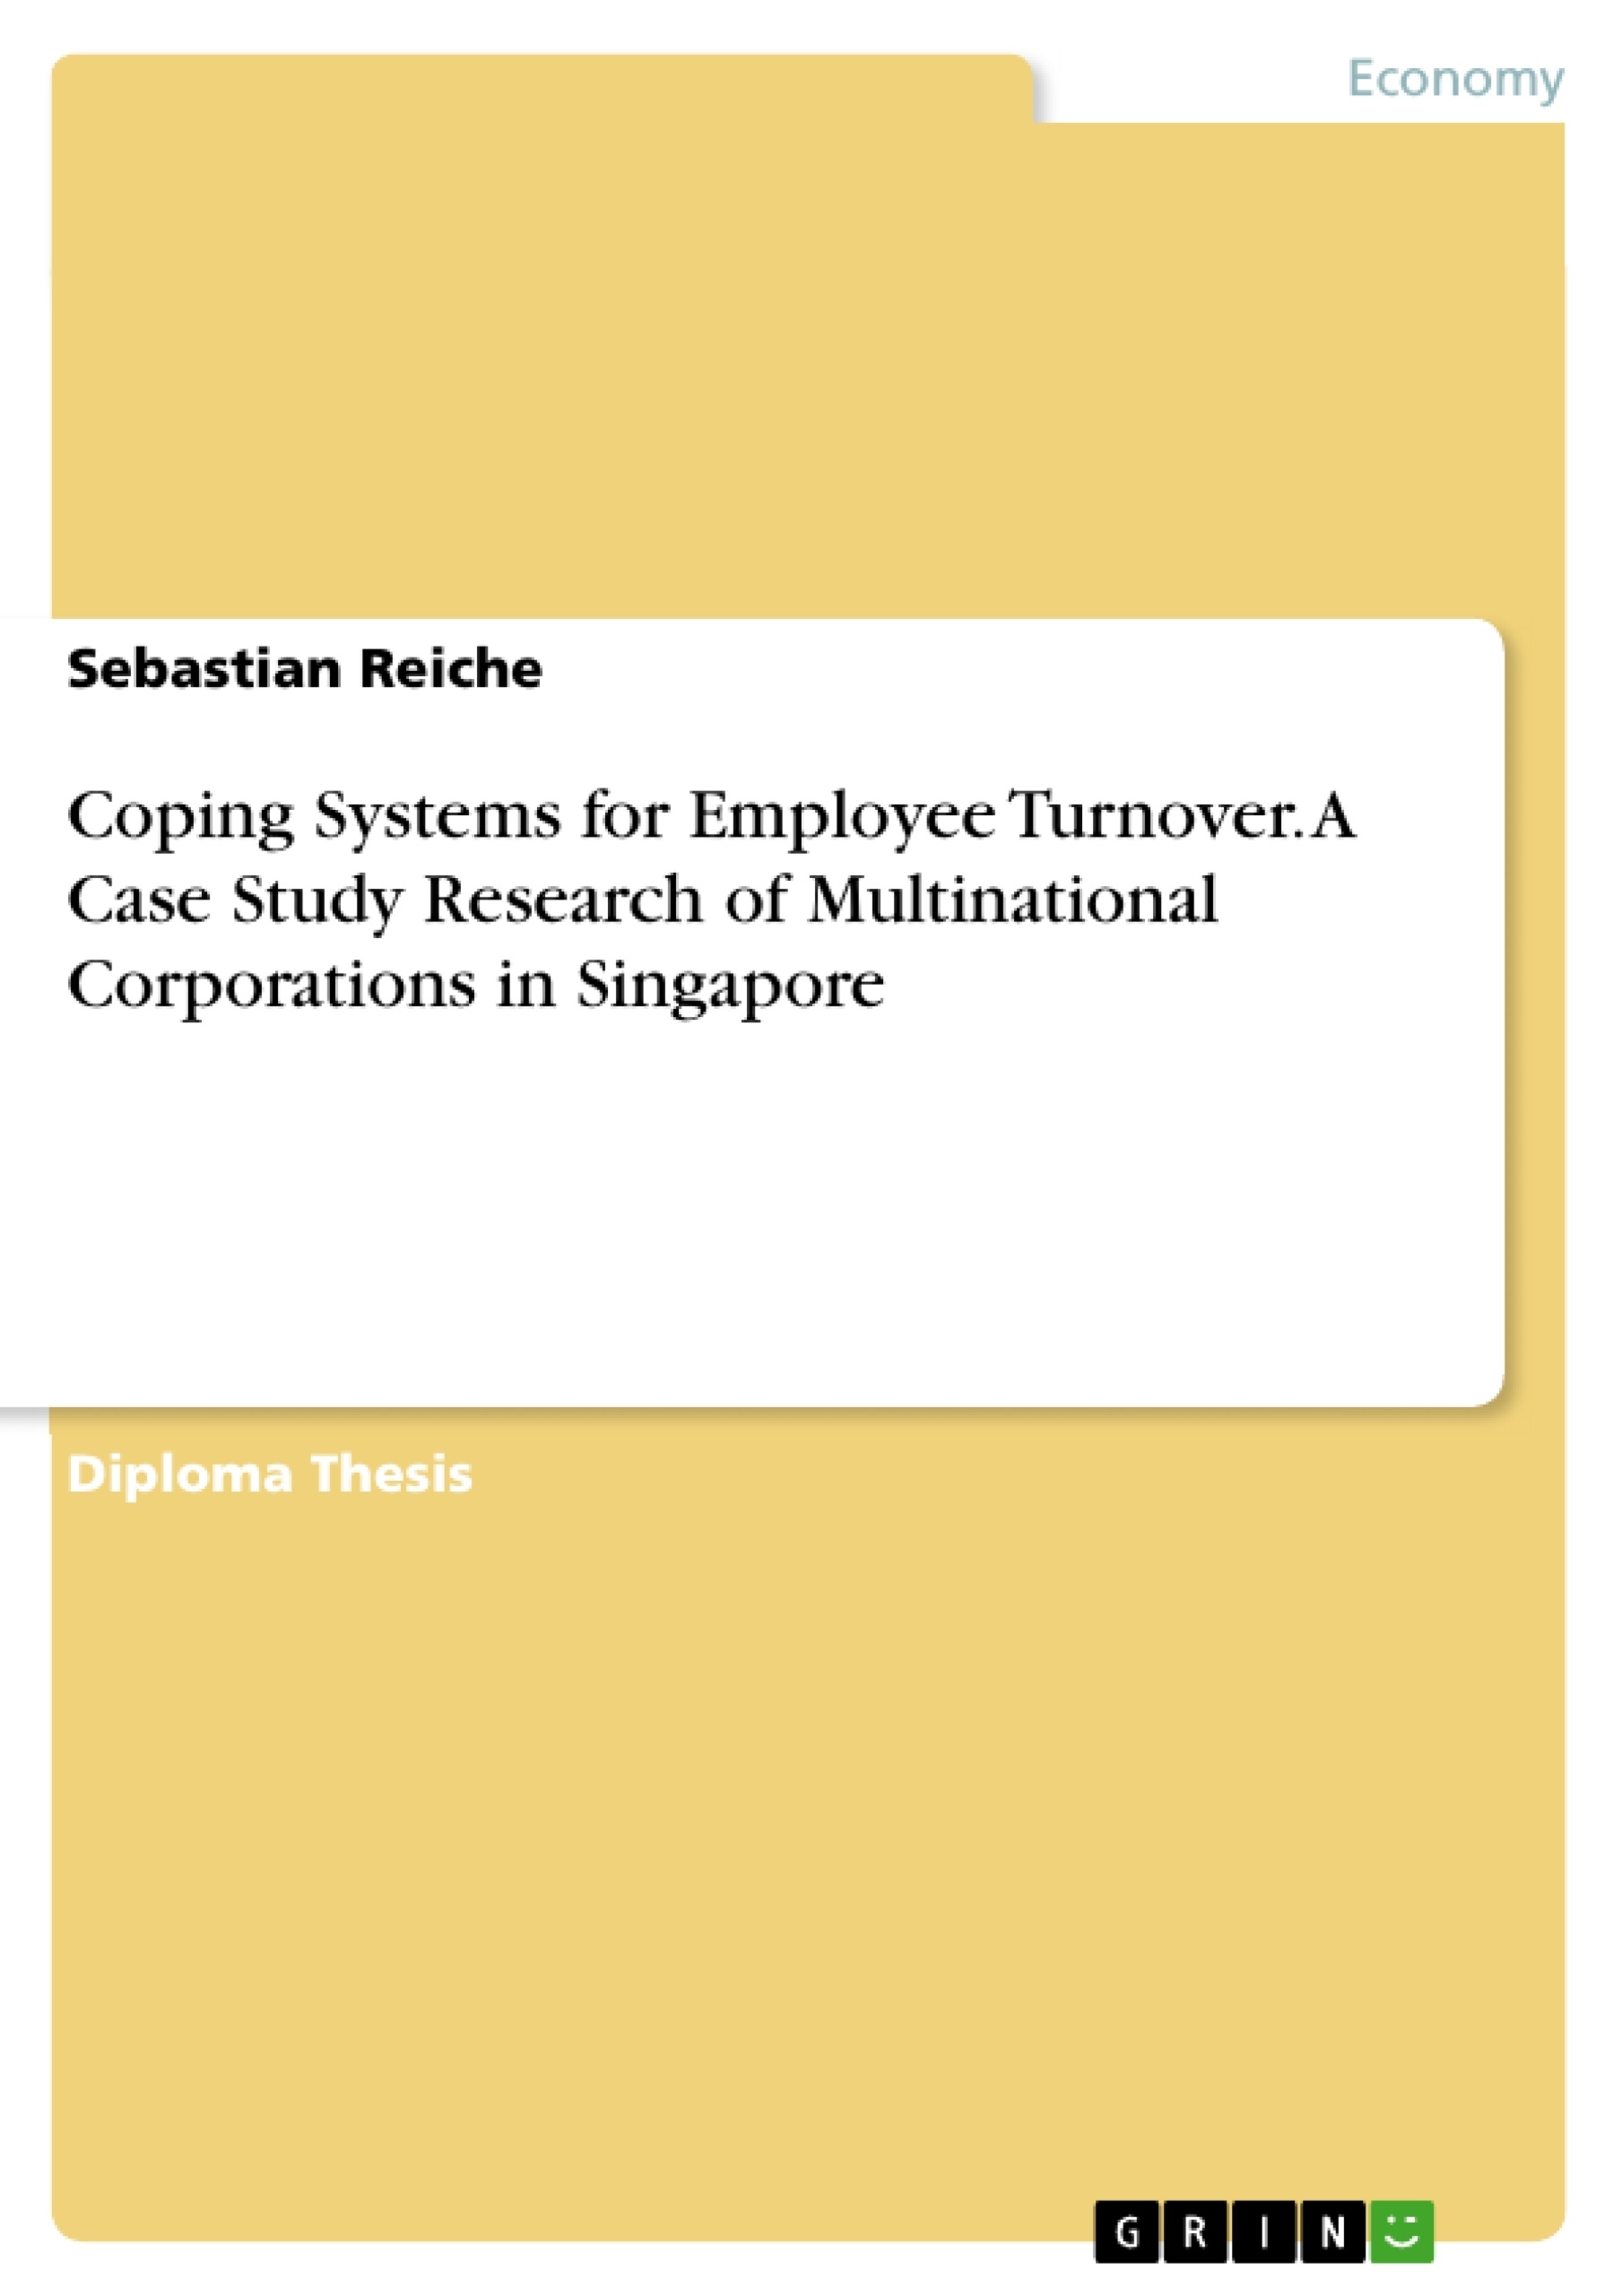 Title: Coping Systems for Employee Turnover. A Case Study Research of Multinational Corporations in Singapore